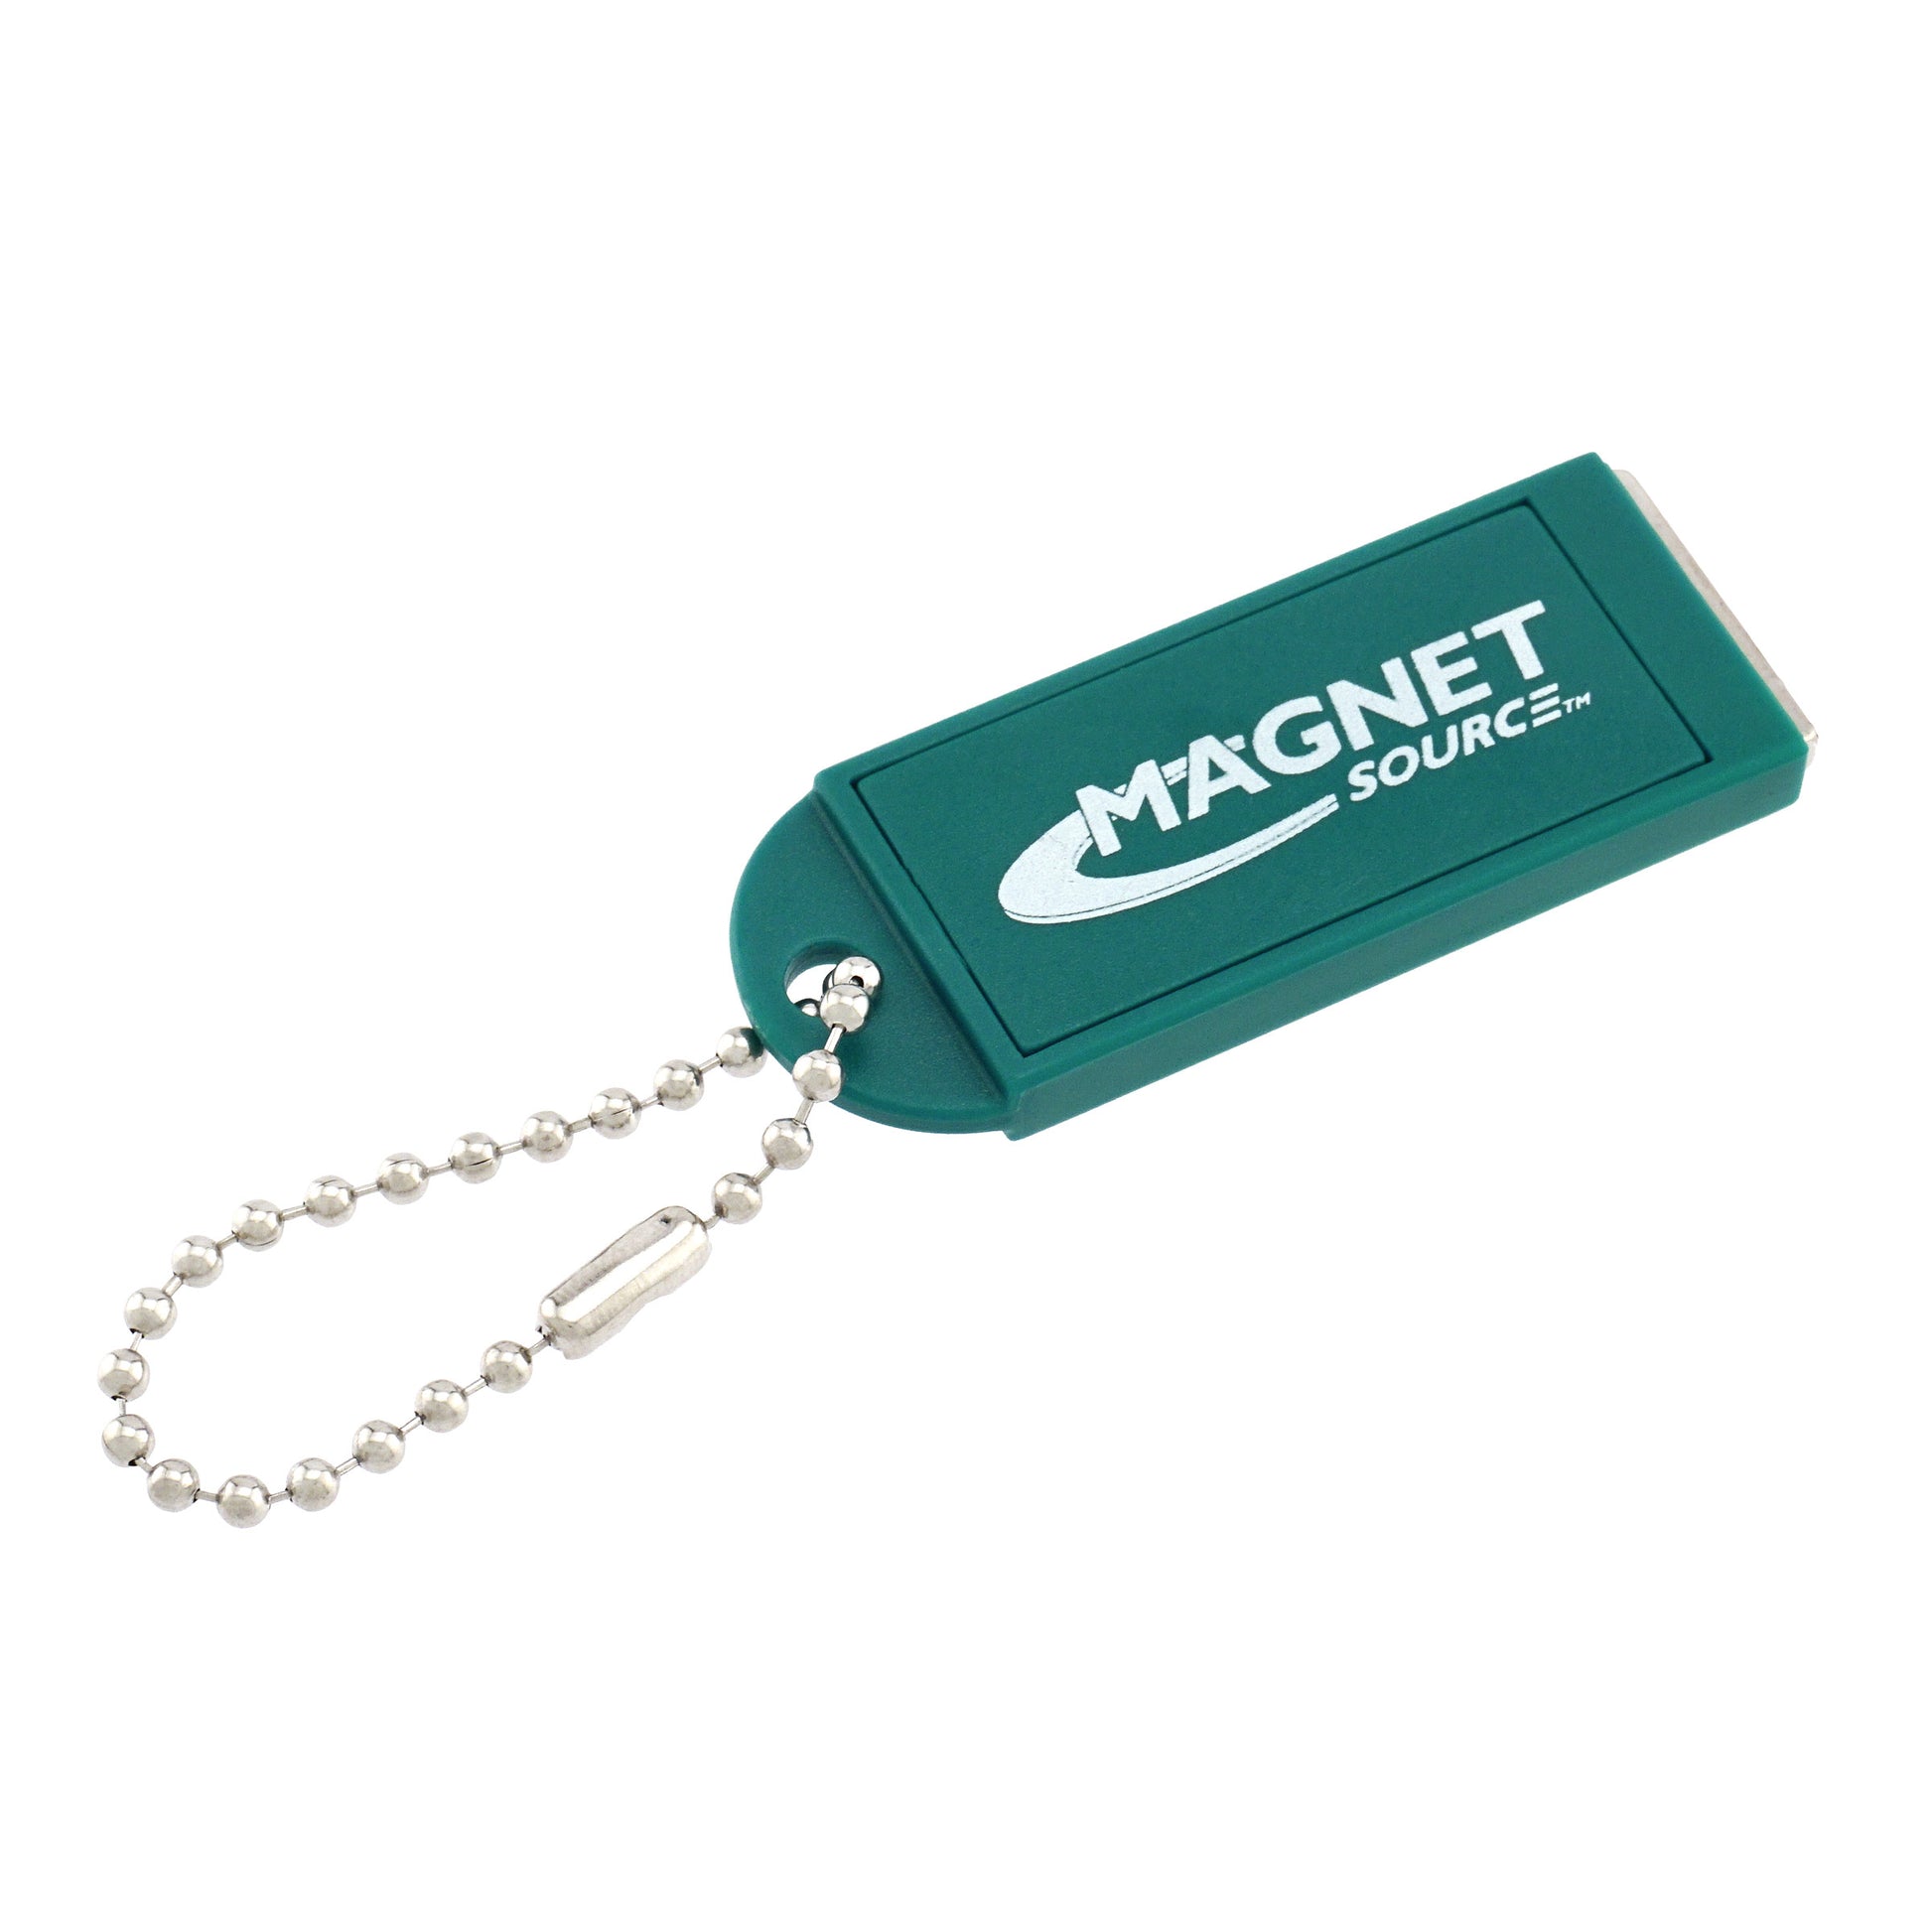 Load image into Gallery viewer, KCMG-BULK Neodymium Key Chain Magnet with Logo, Green - Green Key Chain with Logo